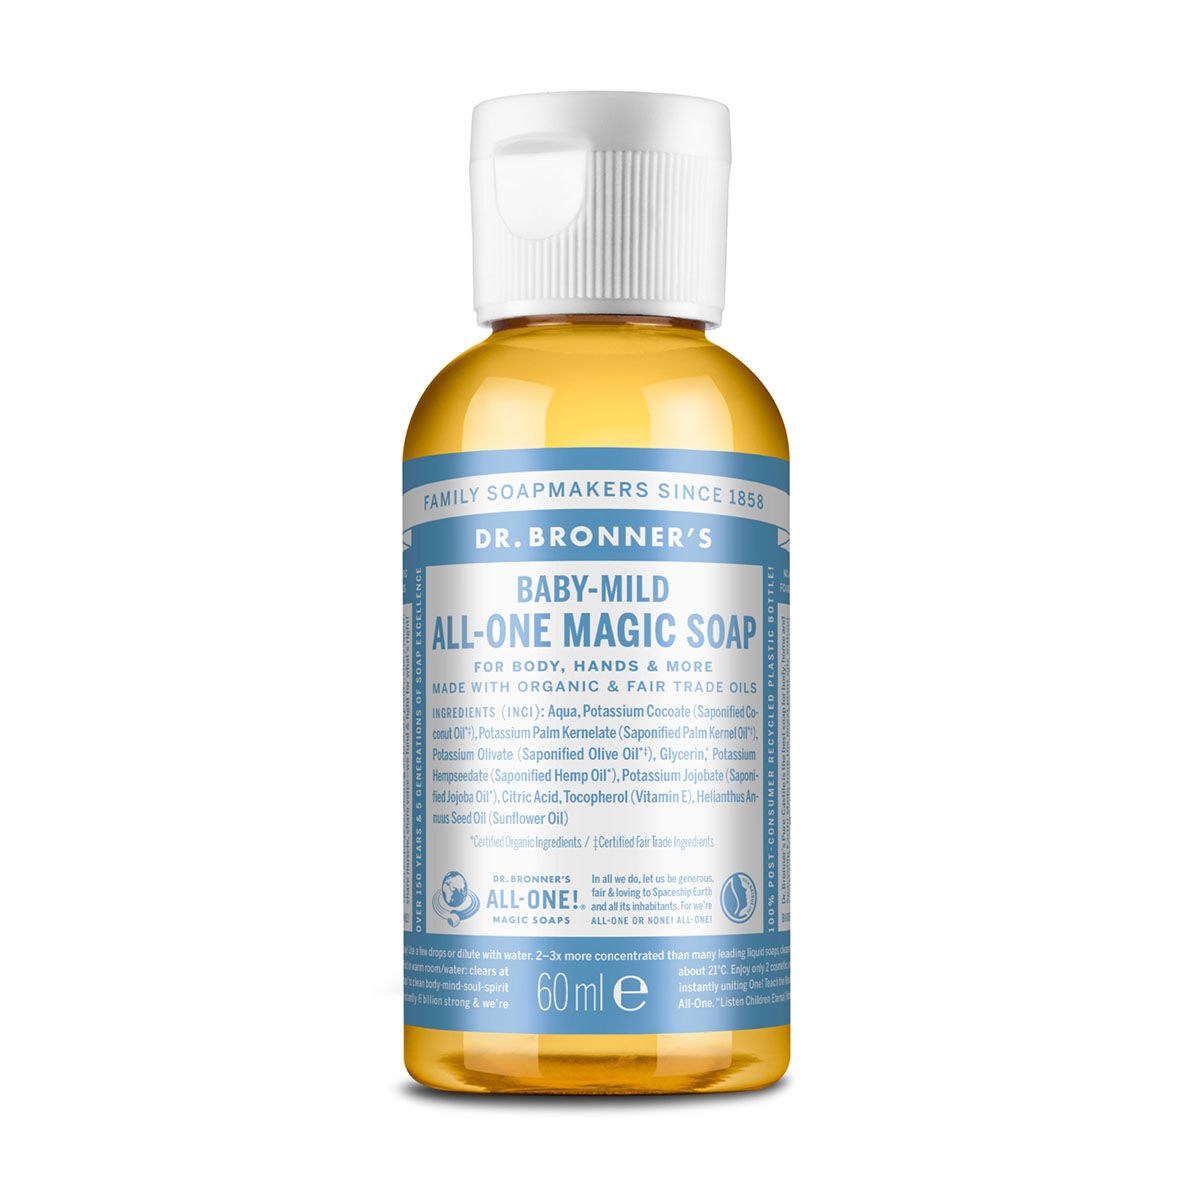 Dr. Bronner's 18 In 1 Liquid Soap Unscented 60ml